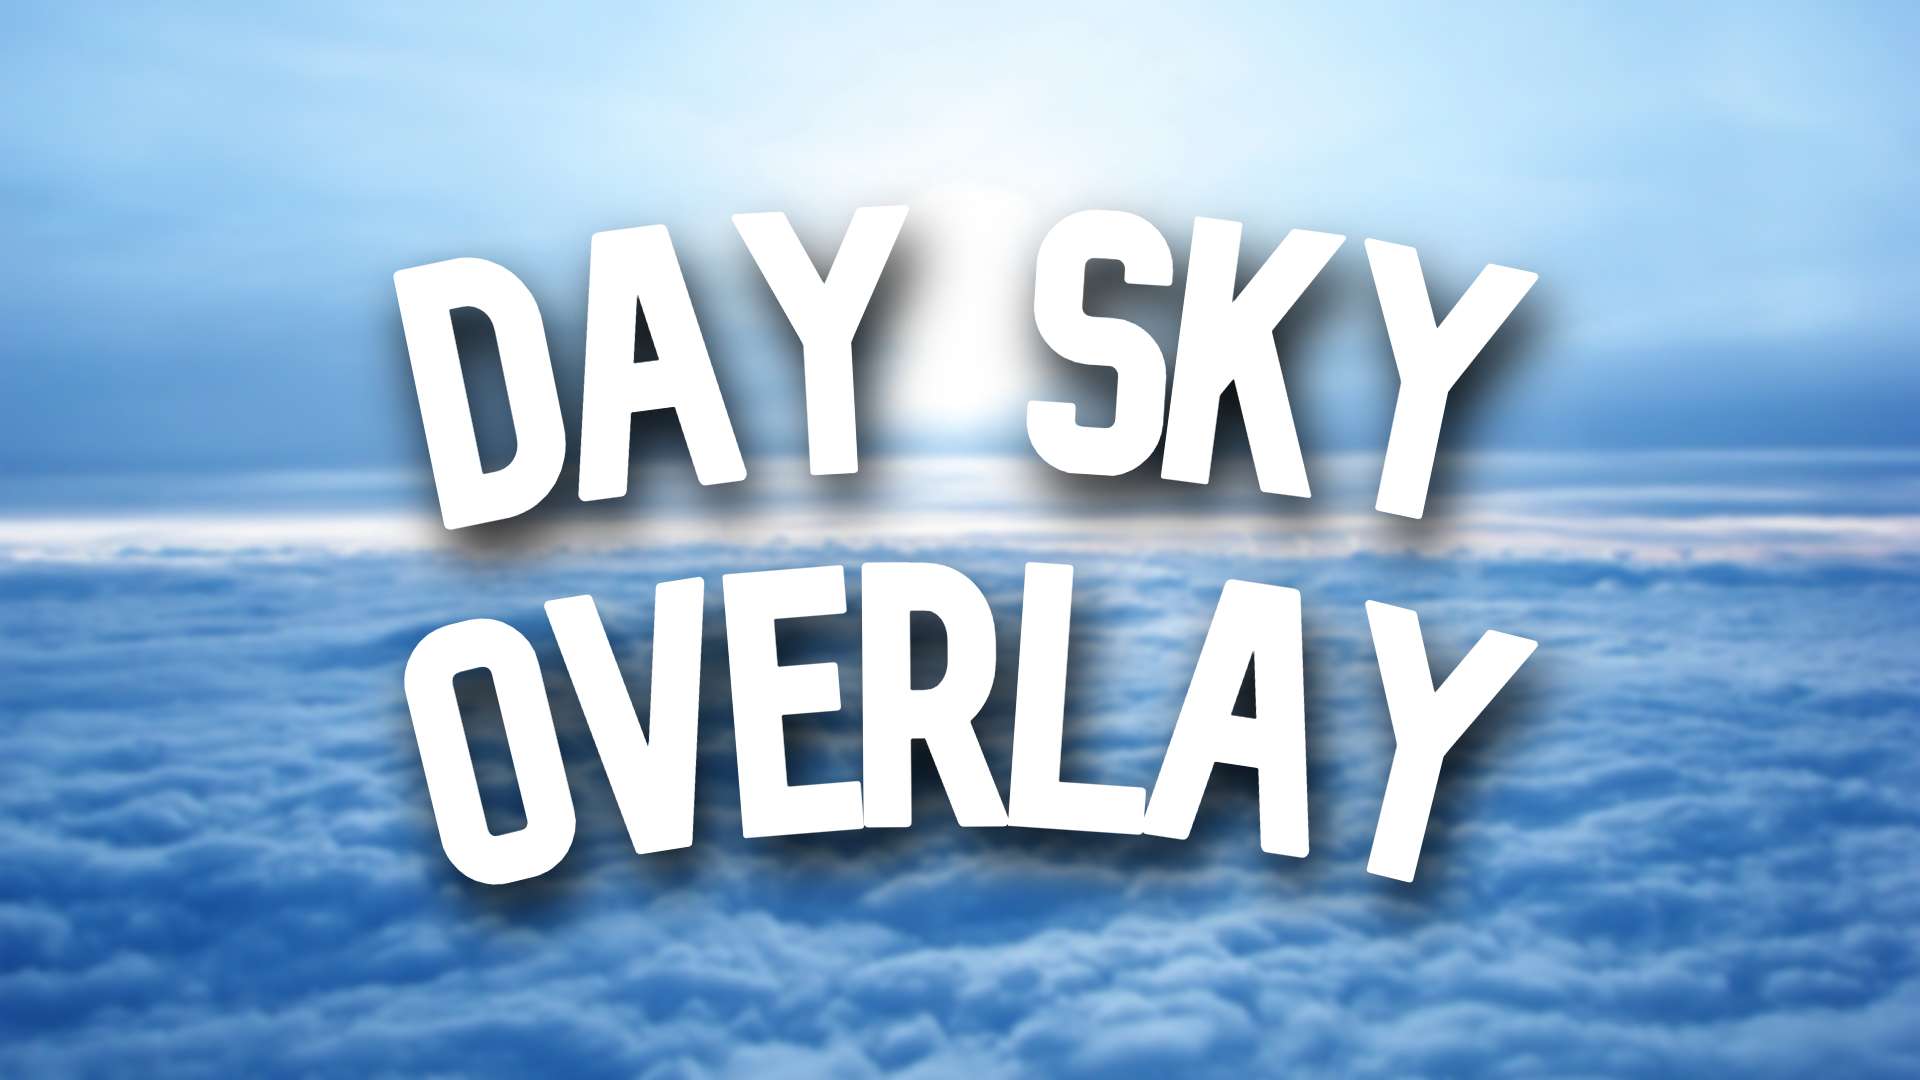 Day Sky Overlay #14 16 by rh56 on PvPRP